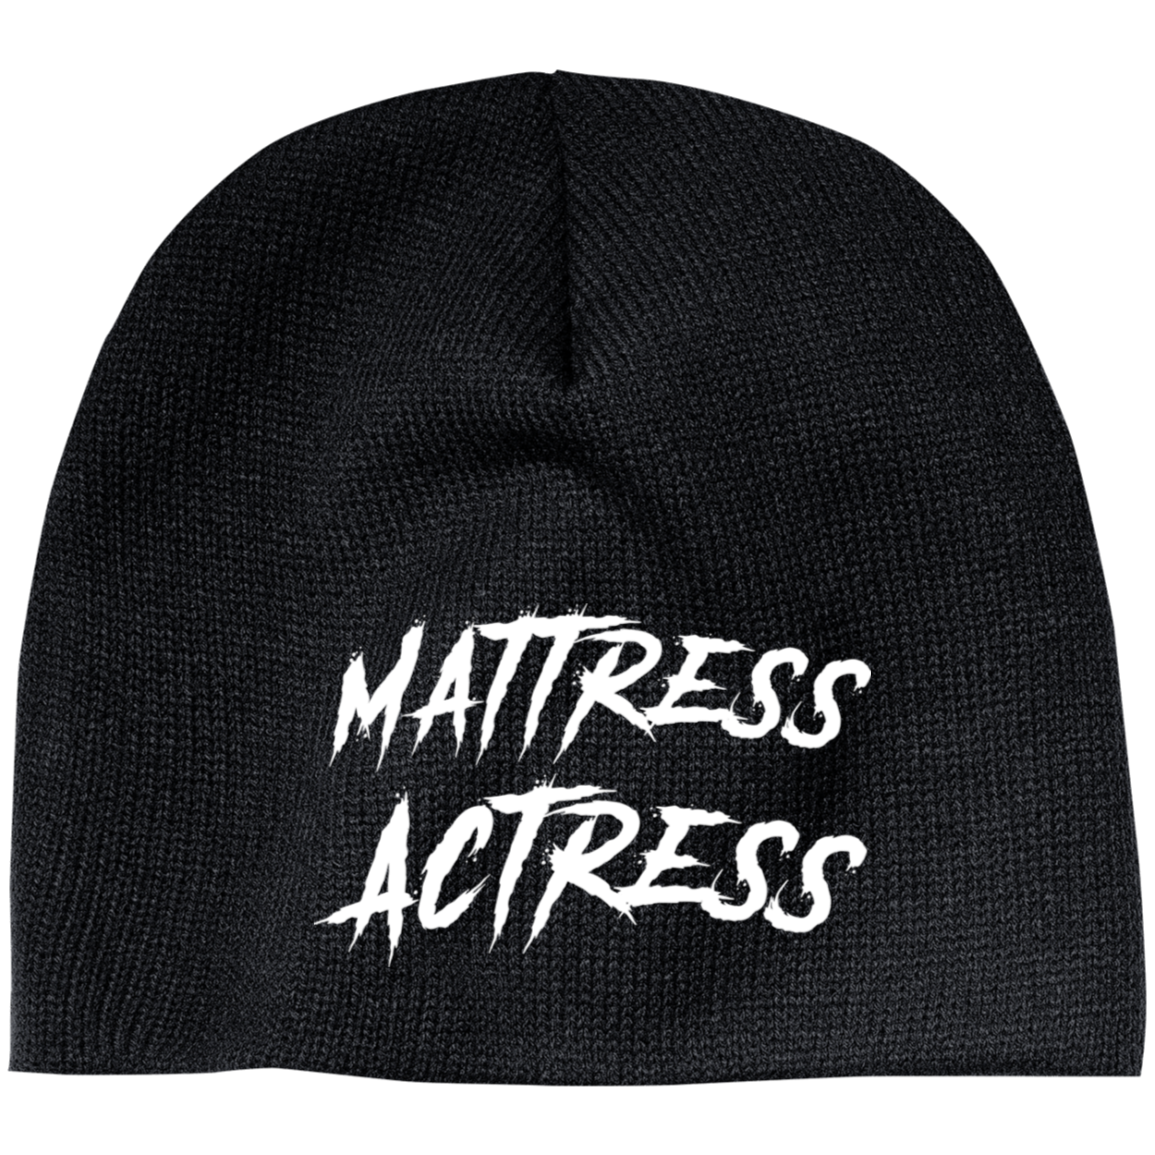 "Mattress Actress" Embroidered 100% Acrylic Beanie